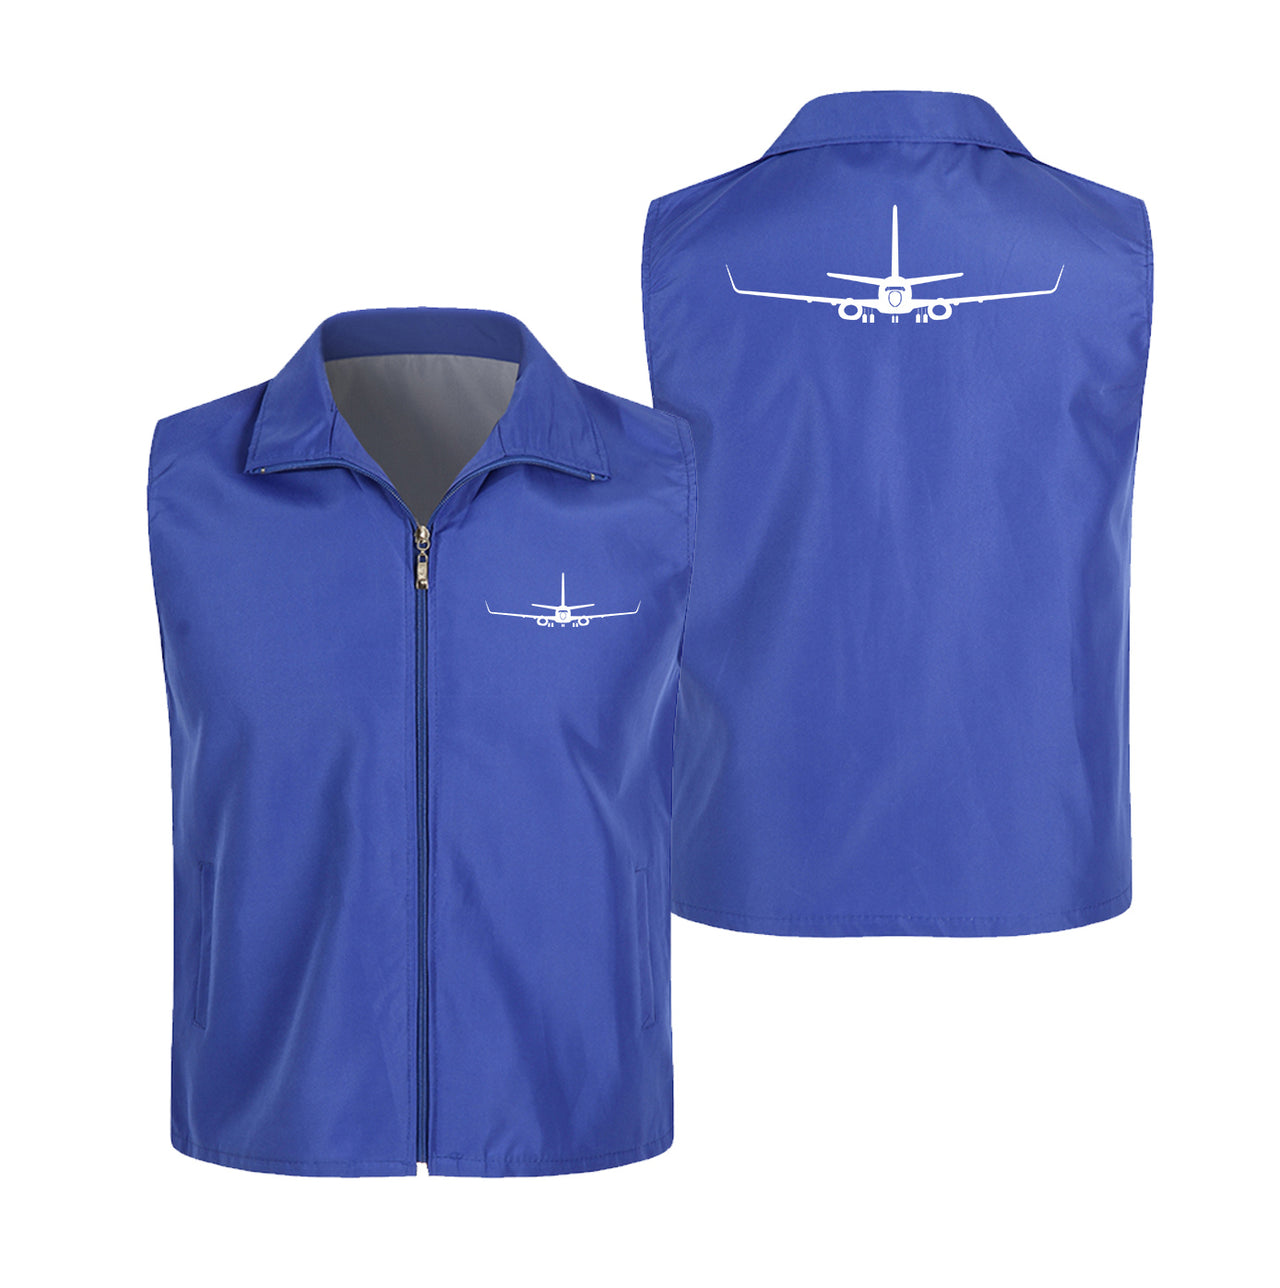 Boeing 737-800NG Silhouette Designed Thin Style Vests